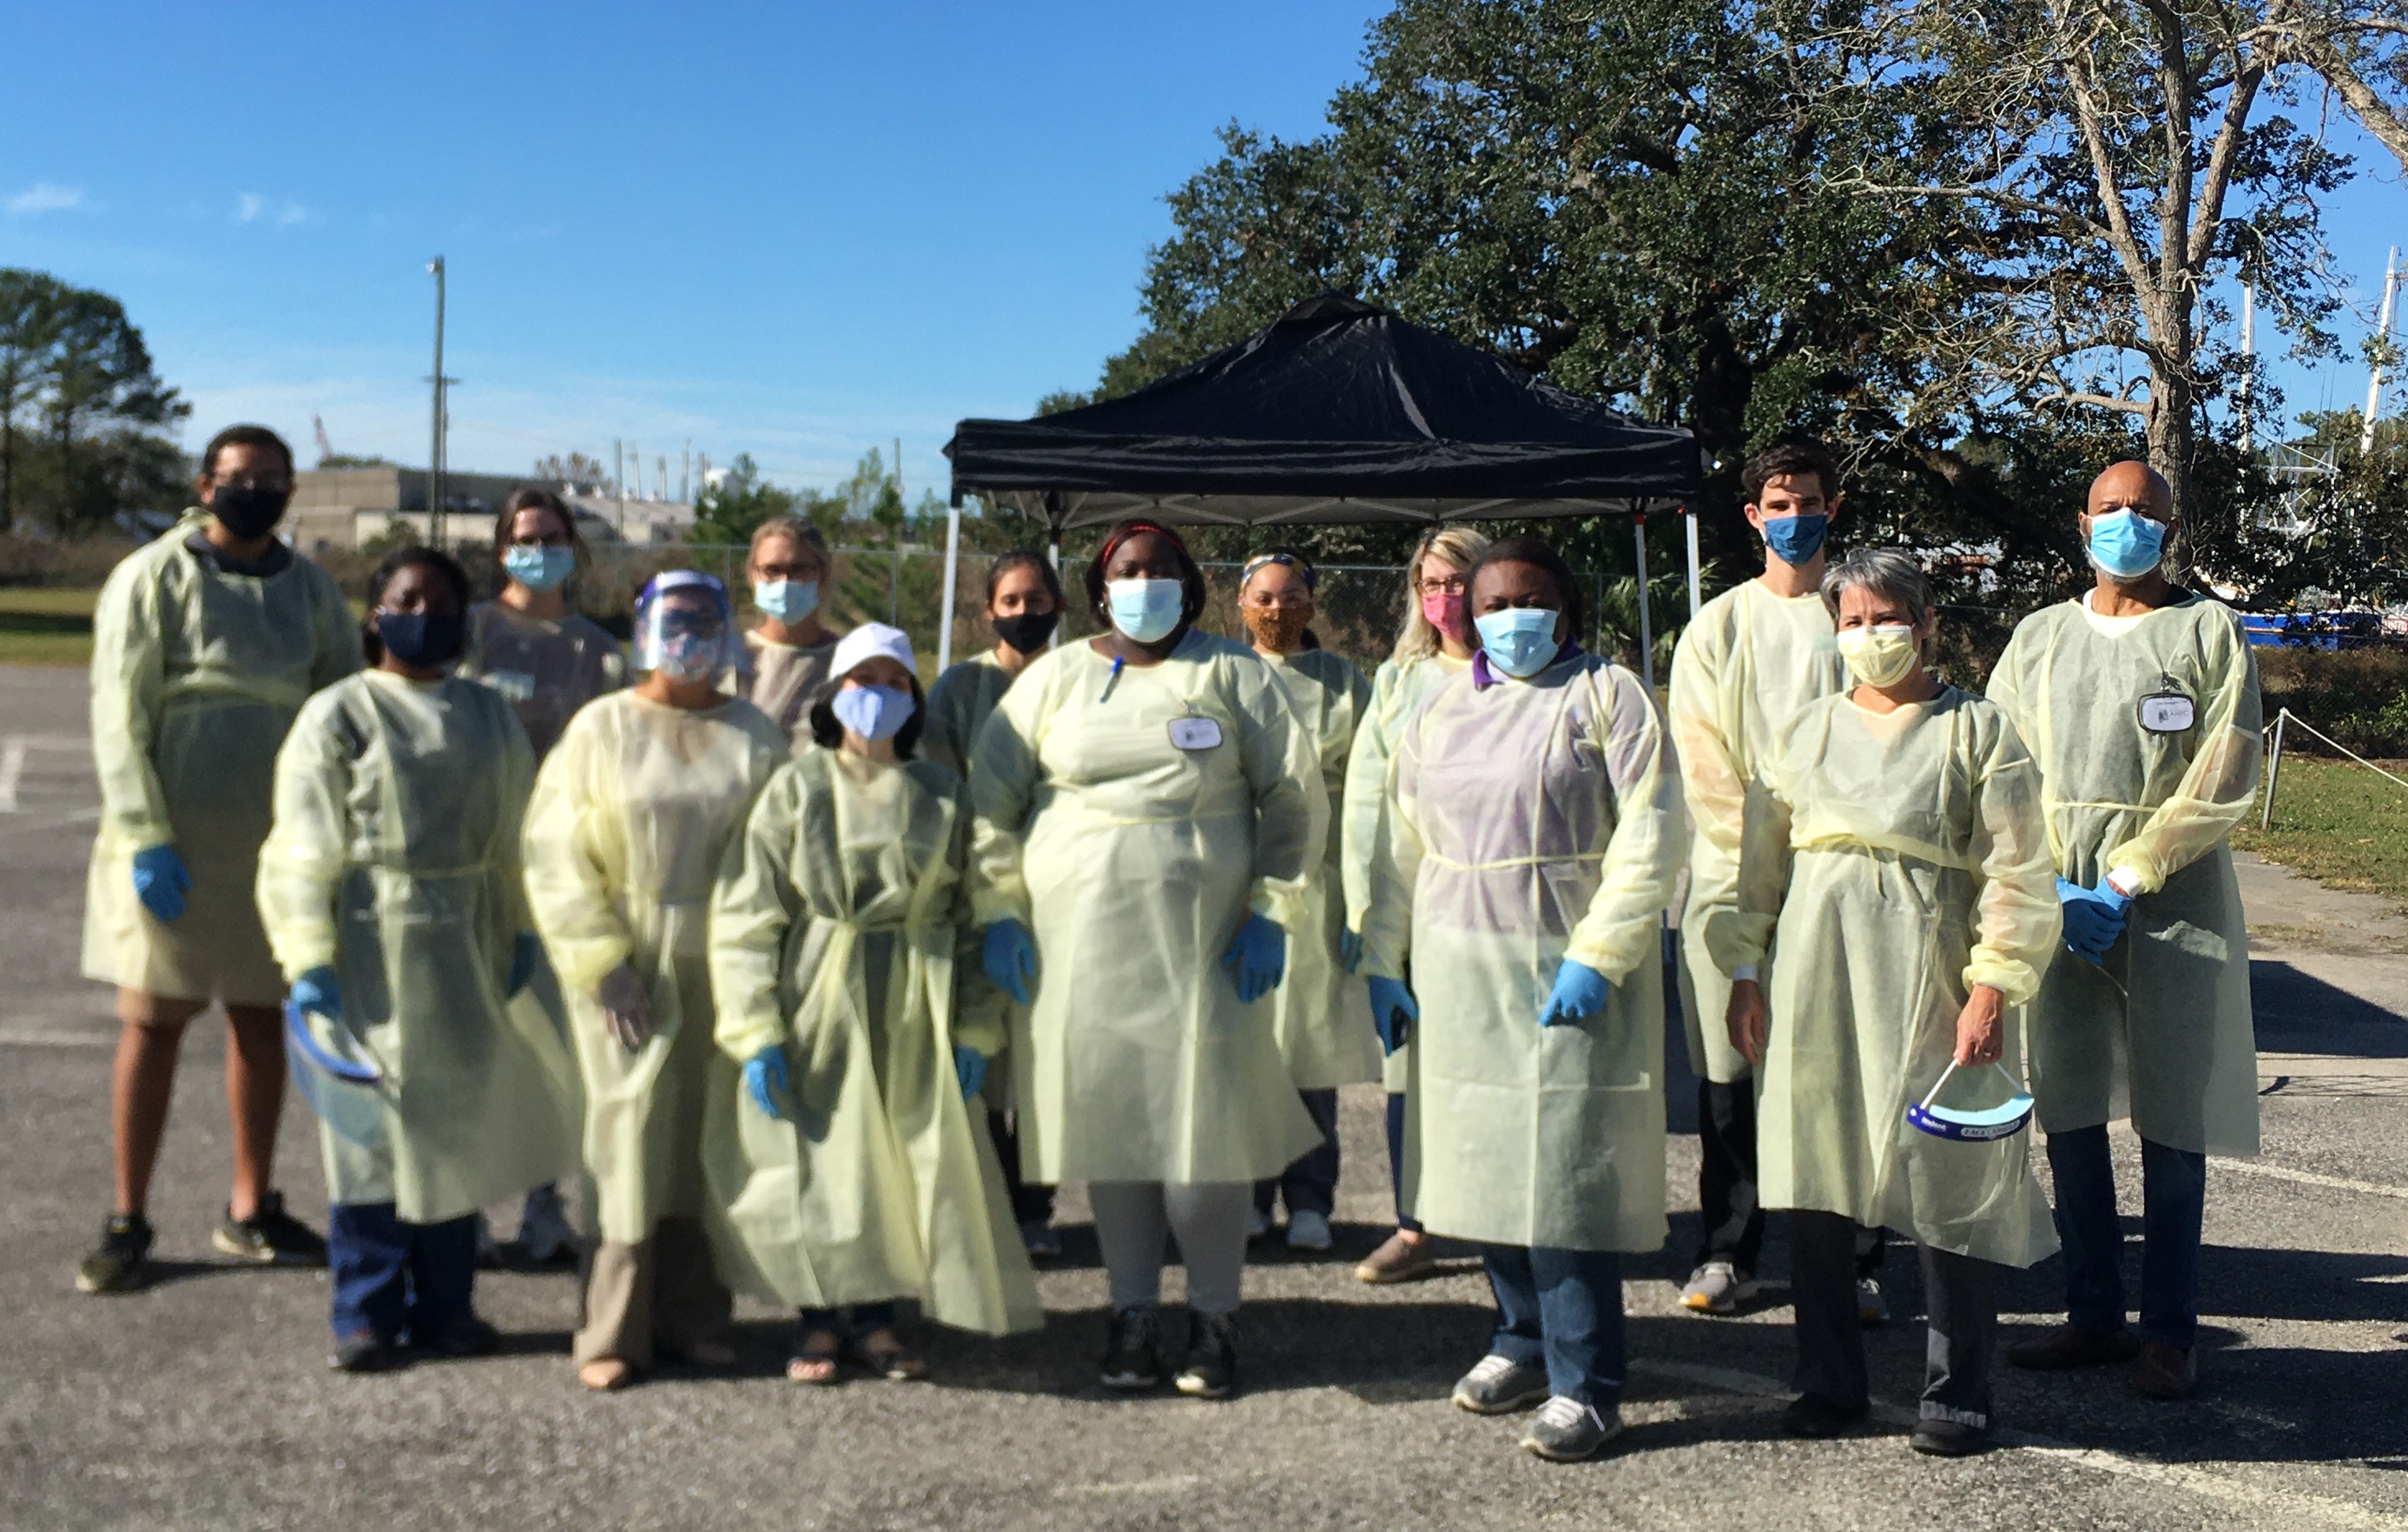 A group of AHEC Scholars and volunteers at a COVID-19 testing and vaccination event. (photos provided by the Southern Alabama AHEC)